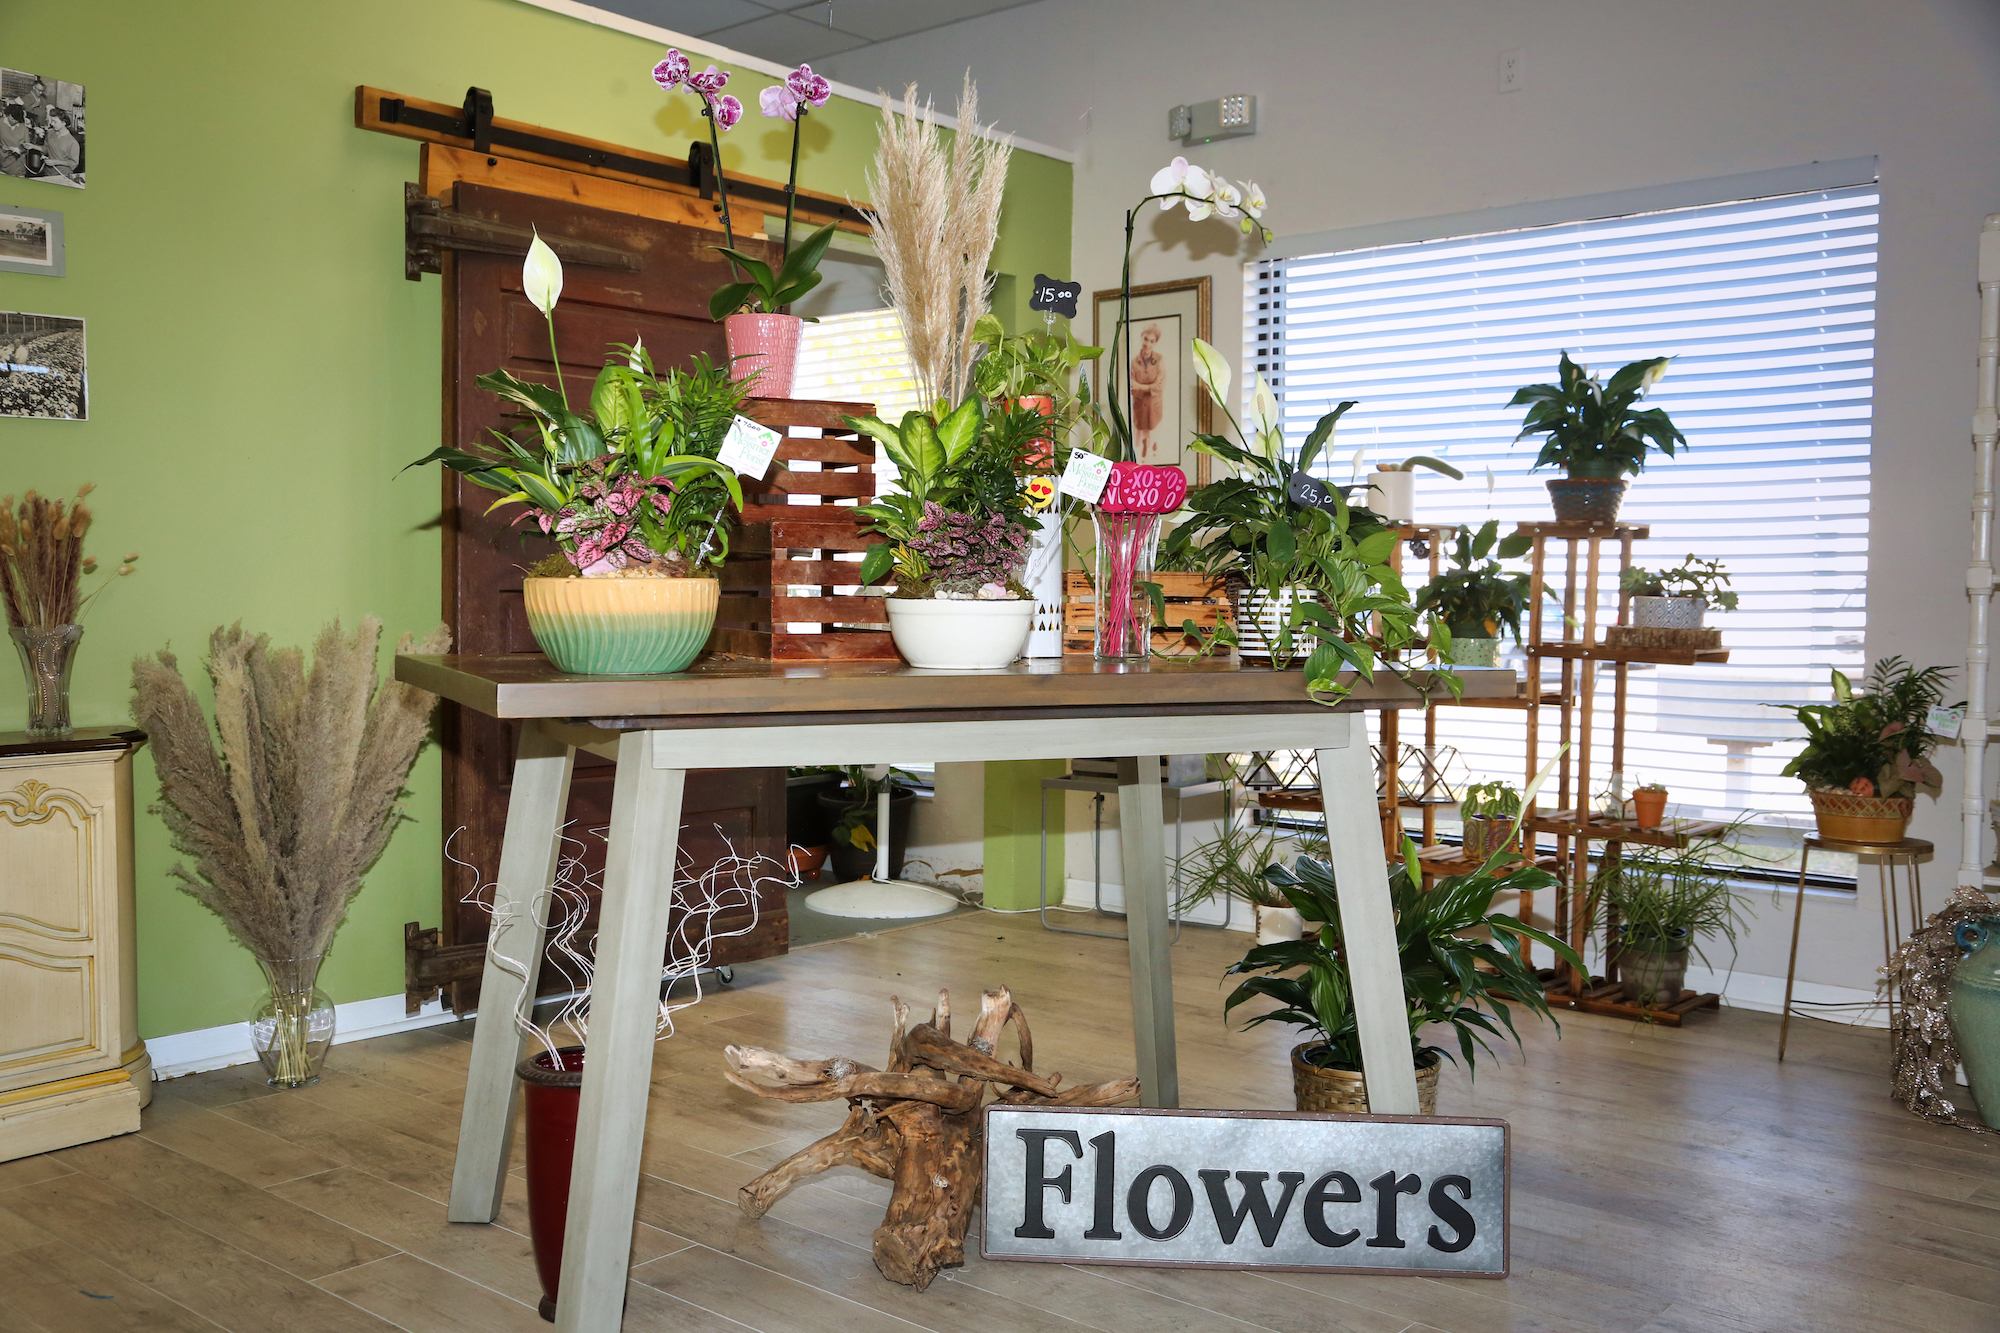 Pifferi. After about 70 years, the Ruth Messmer Florist Inc. is still going strong as a third-generation family-owned business.